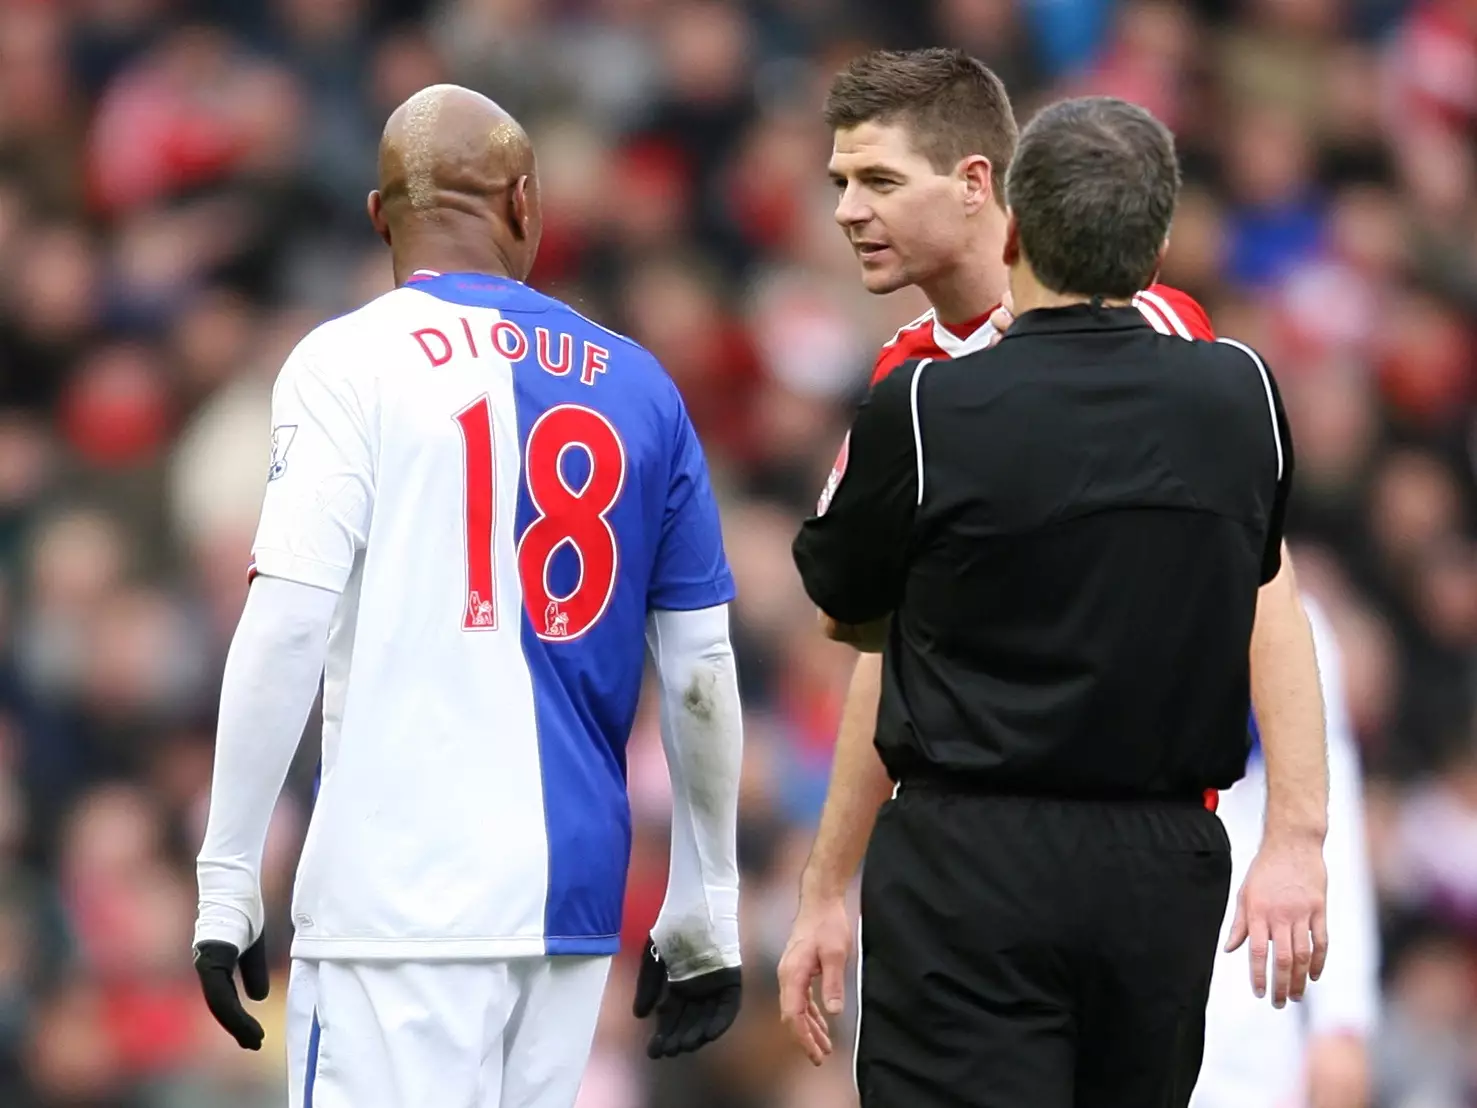 Fair to say Diouf and Gerrard aren't on each other's Christmas card lists. Image: PA Images